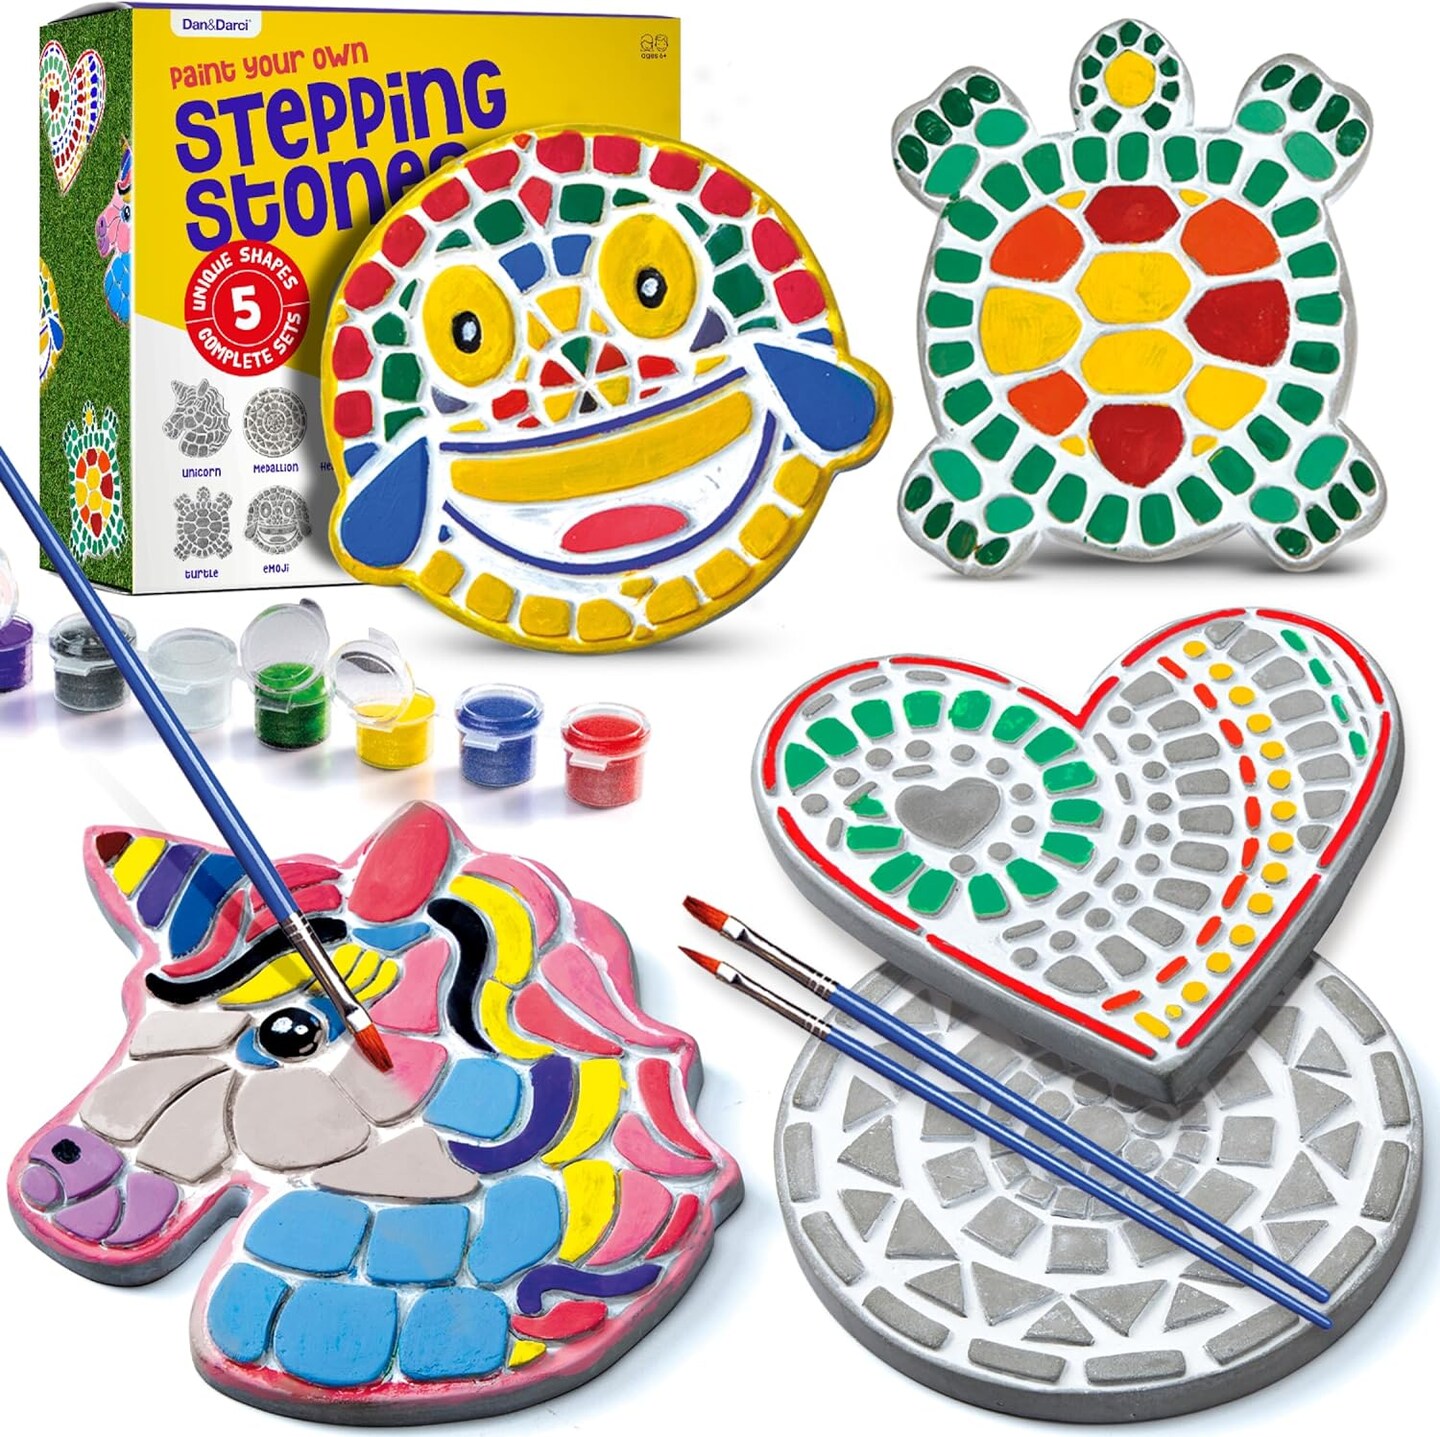 Stepping Stones Painting Kit for Kids